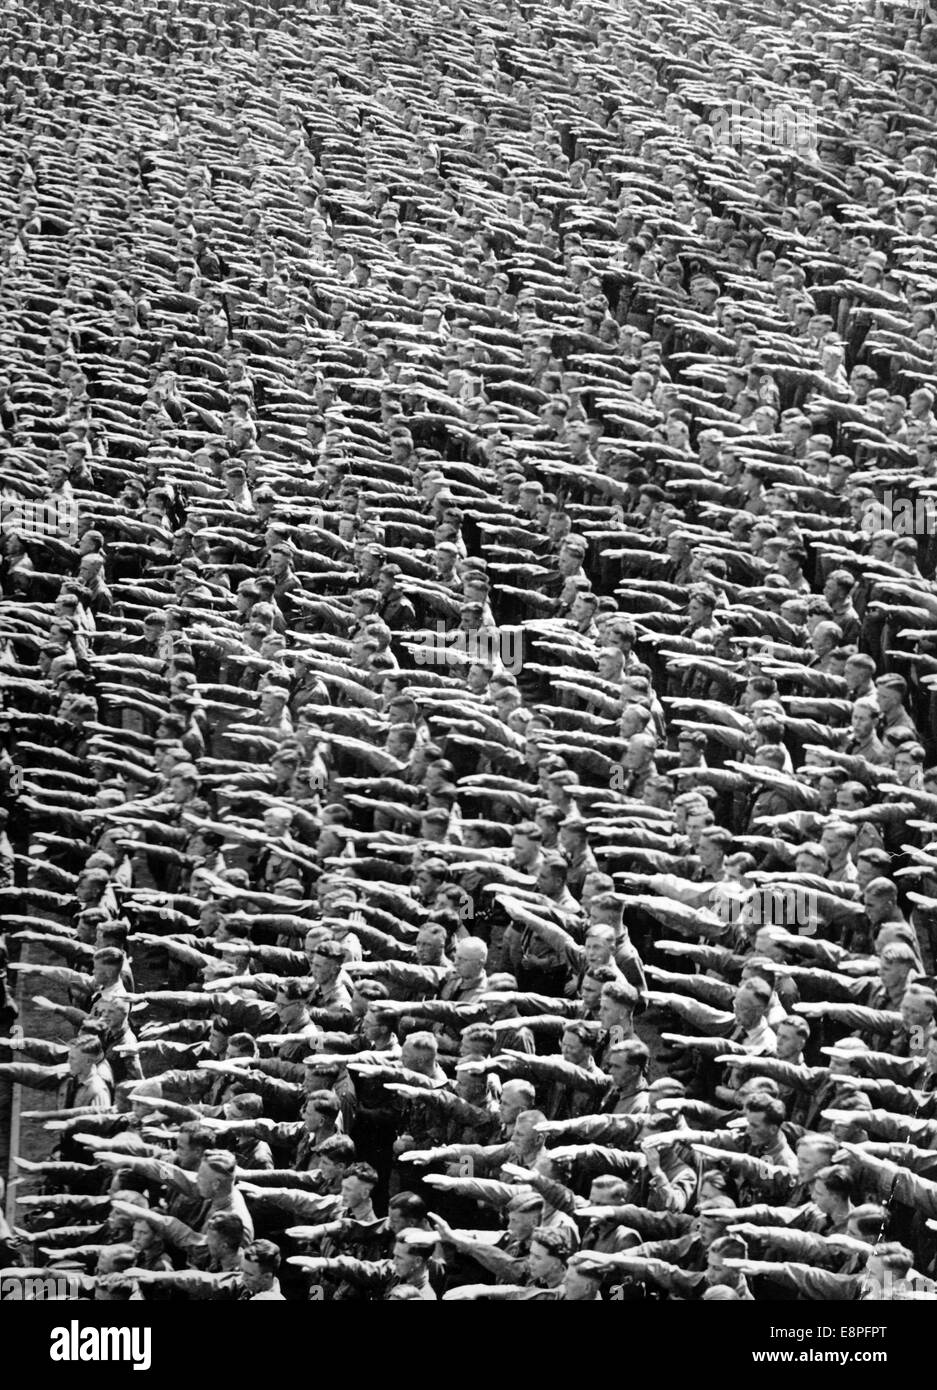 Nuremberg Rally 1935 in Nuremberg, Germany - Members of the Hitler Youth (HJ) perform the Nazi salute at the Nazi party rally grounds. (Flaws in quality due to the historic picture copy) Fotoarchiv für Zeitgeschichtee - NO WIRE SERVICE - Stock Photo